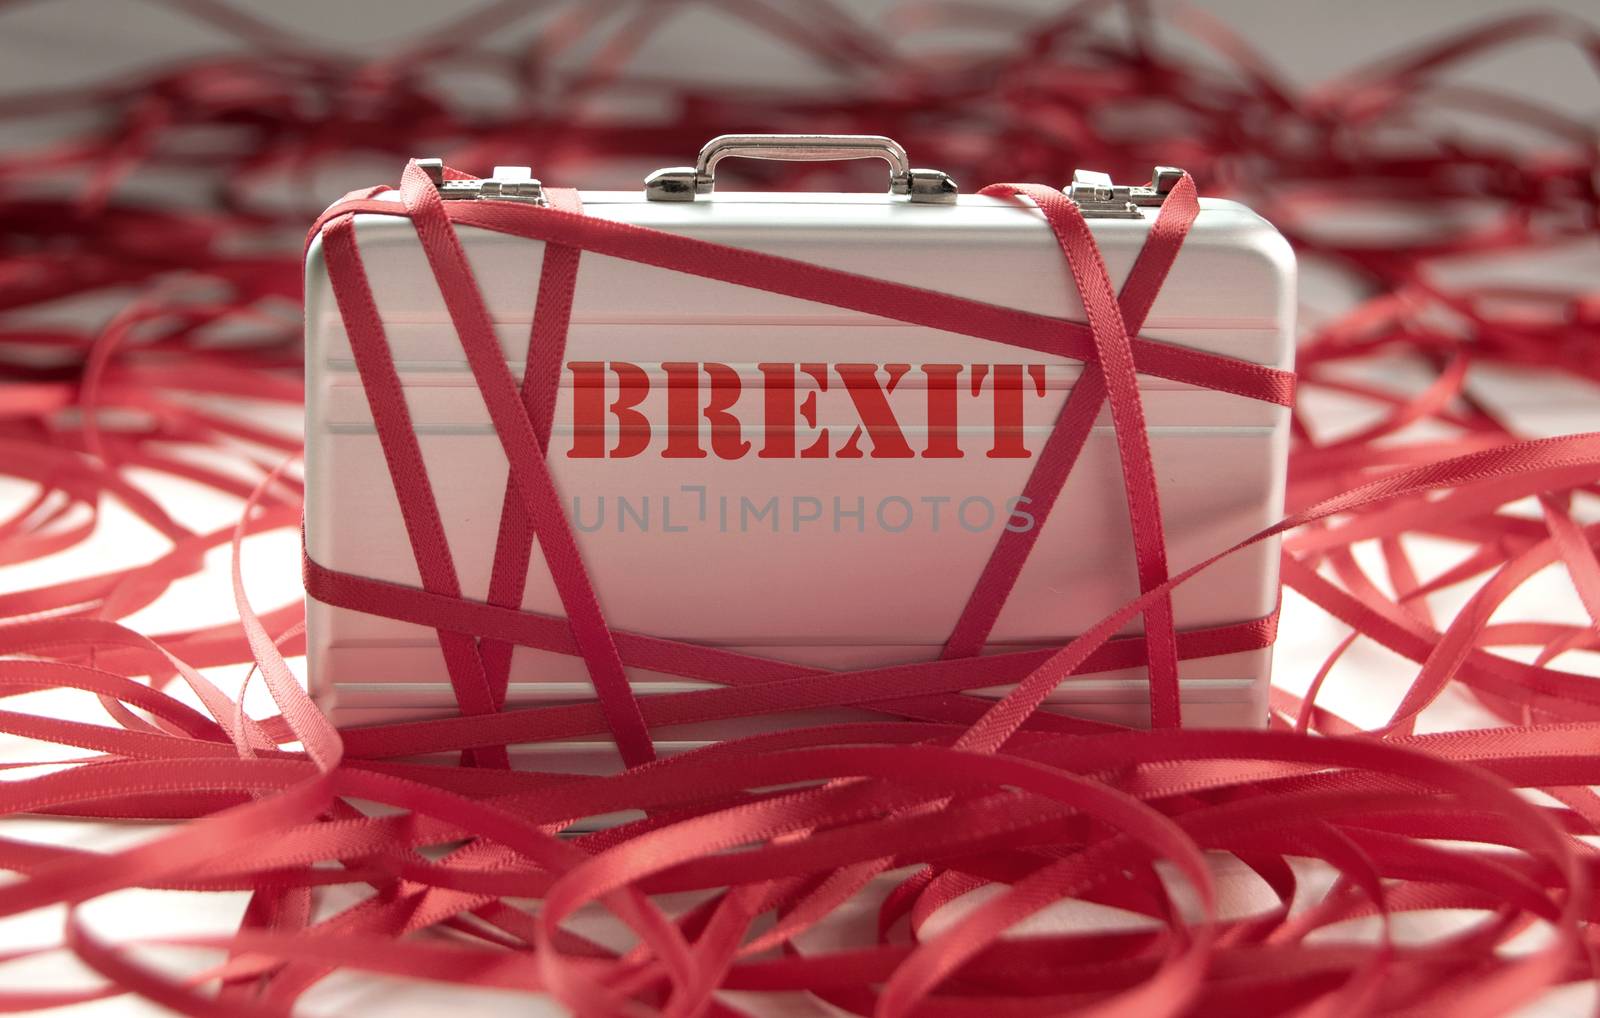 Brexit red tape by unikpix